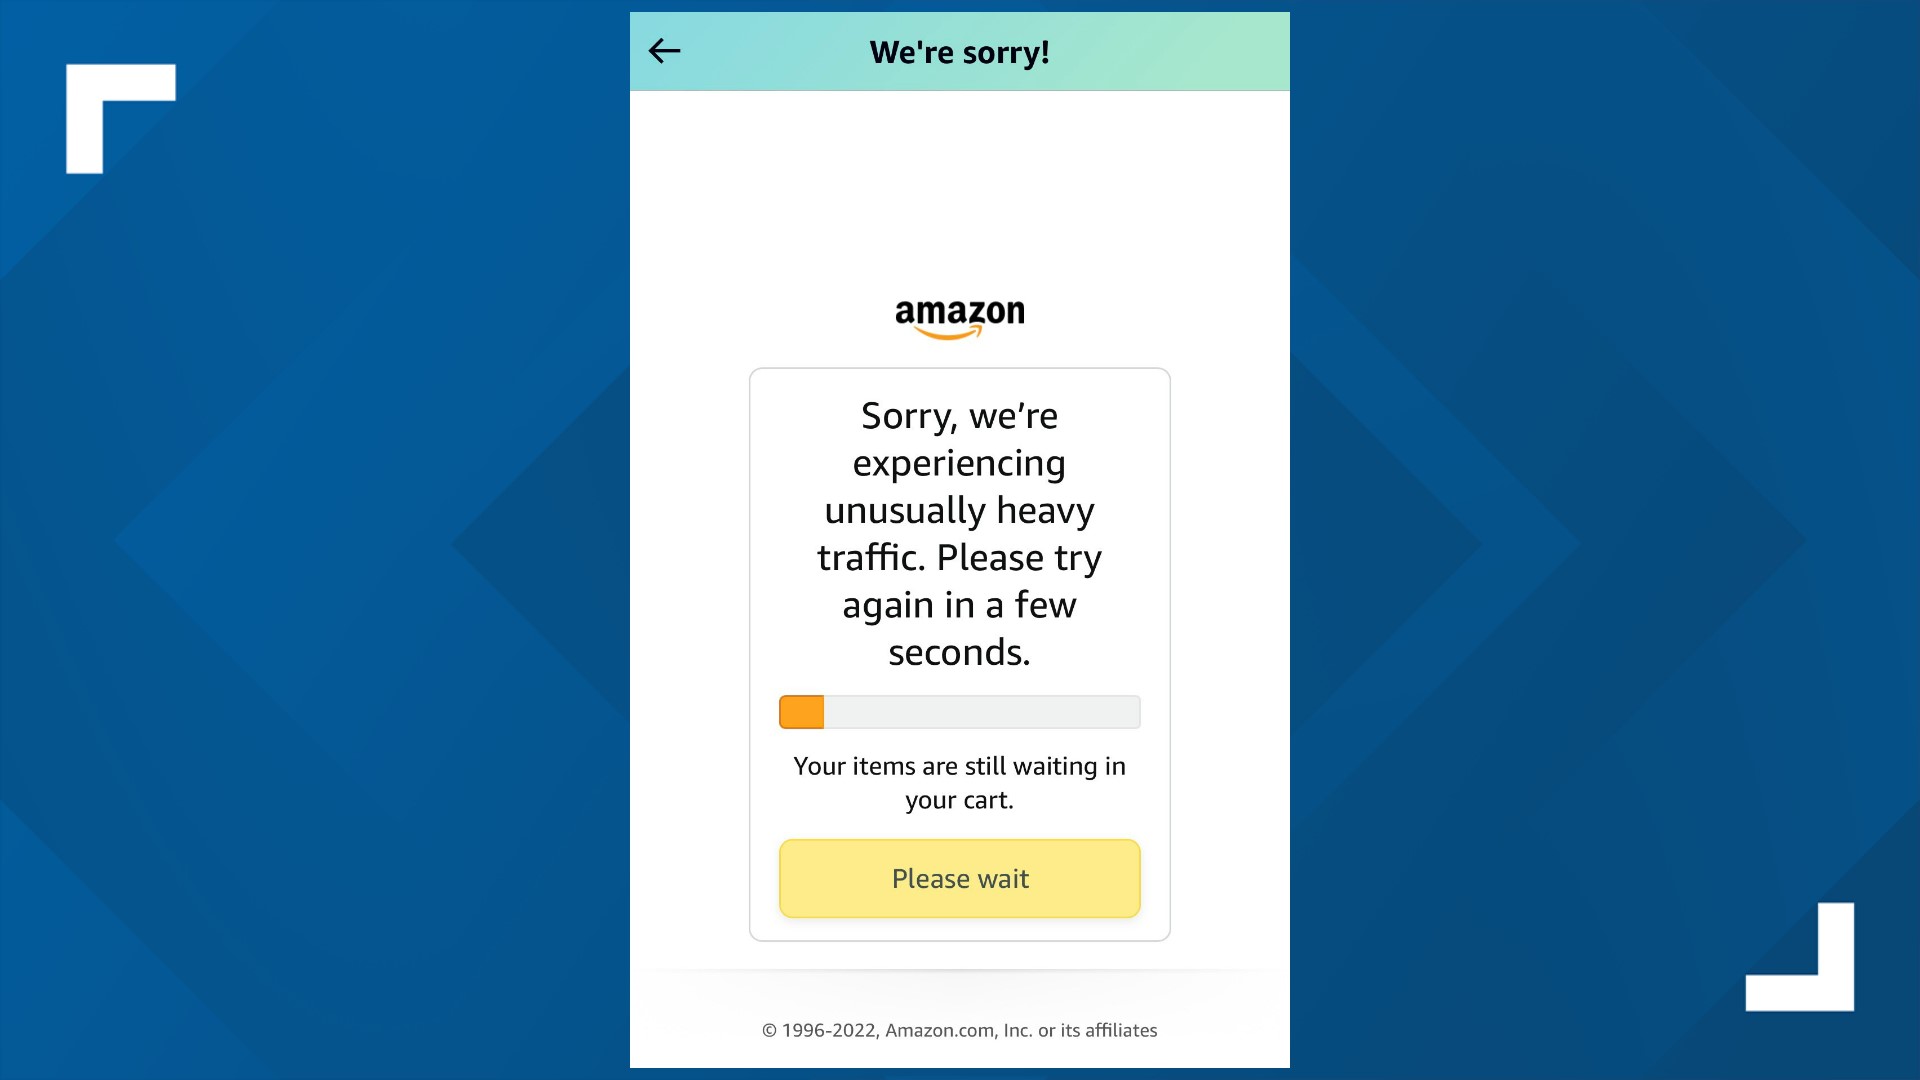 Thousands of customers reported issues with checkout on the Amazon shopping website Wednesday morning.